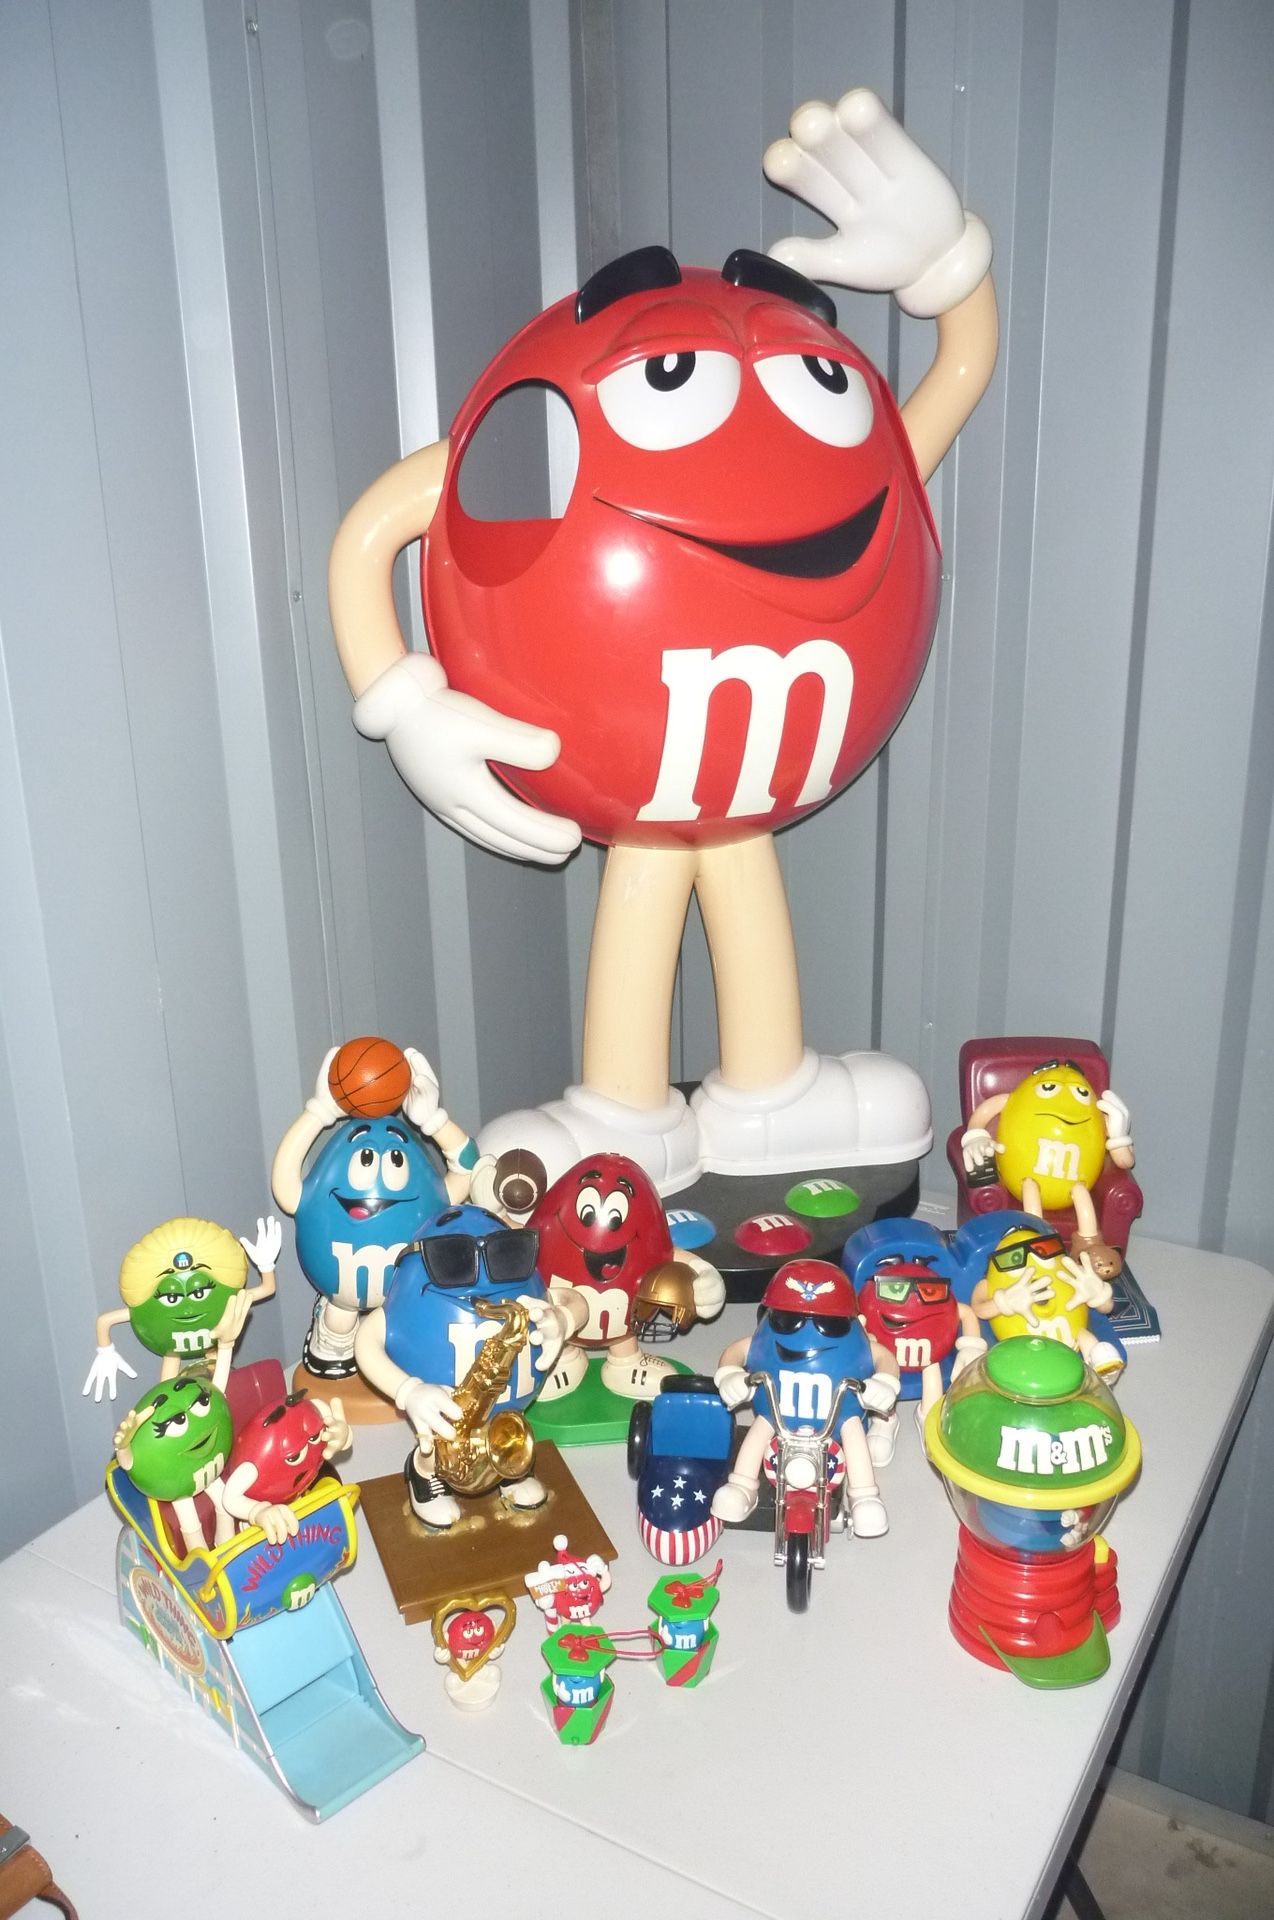 M&M’s small collection